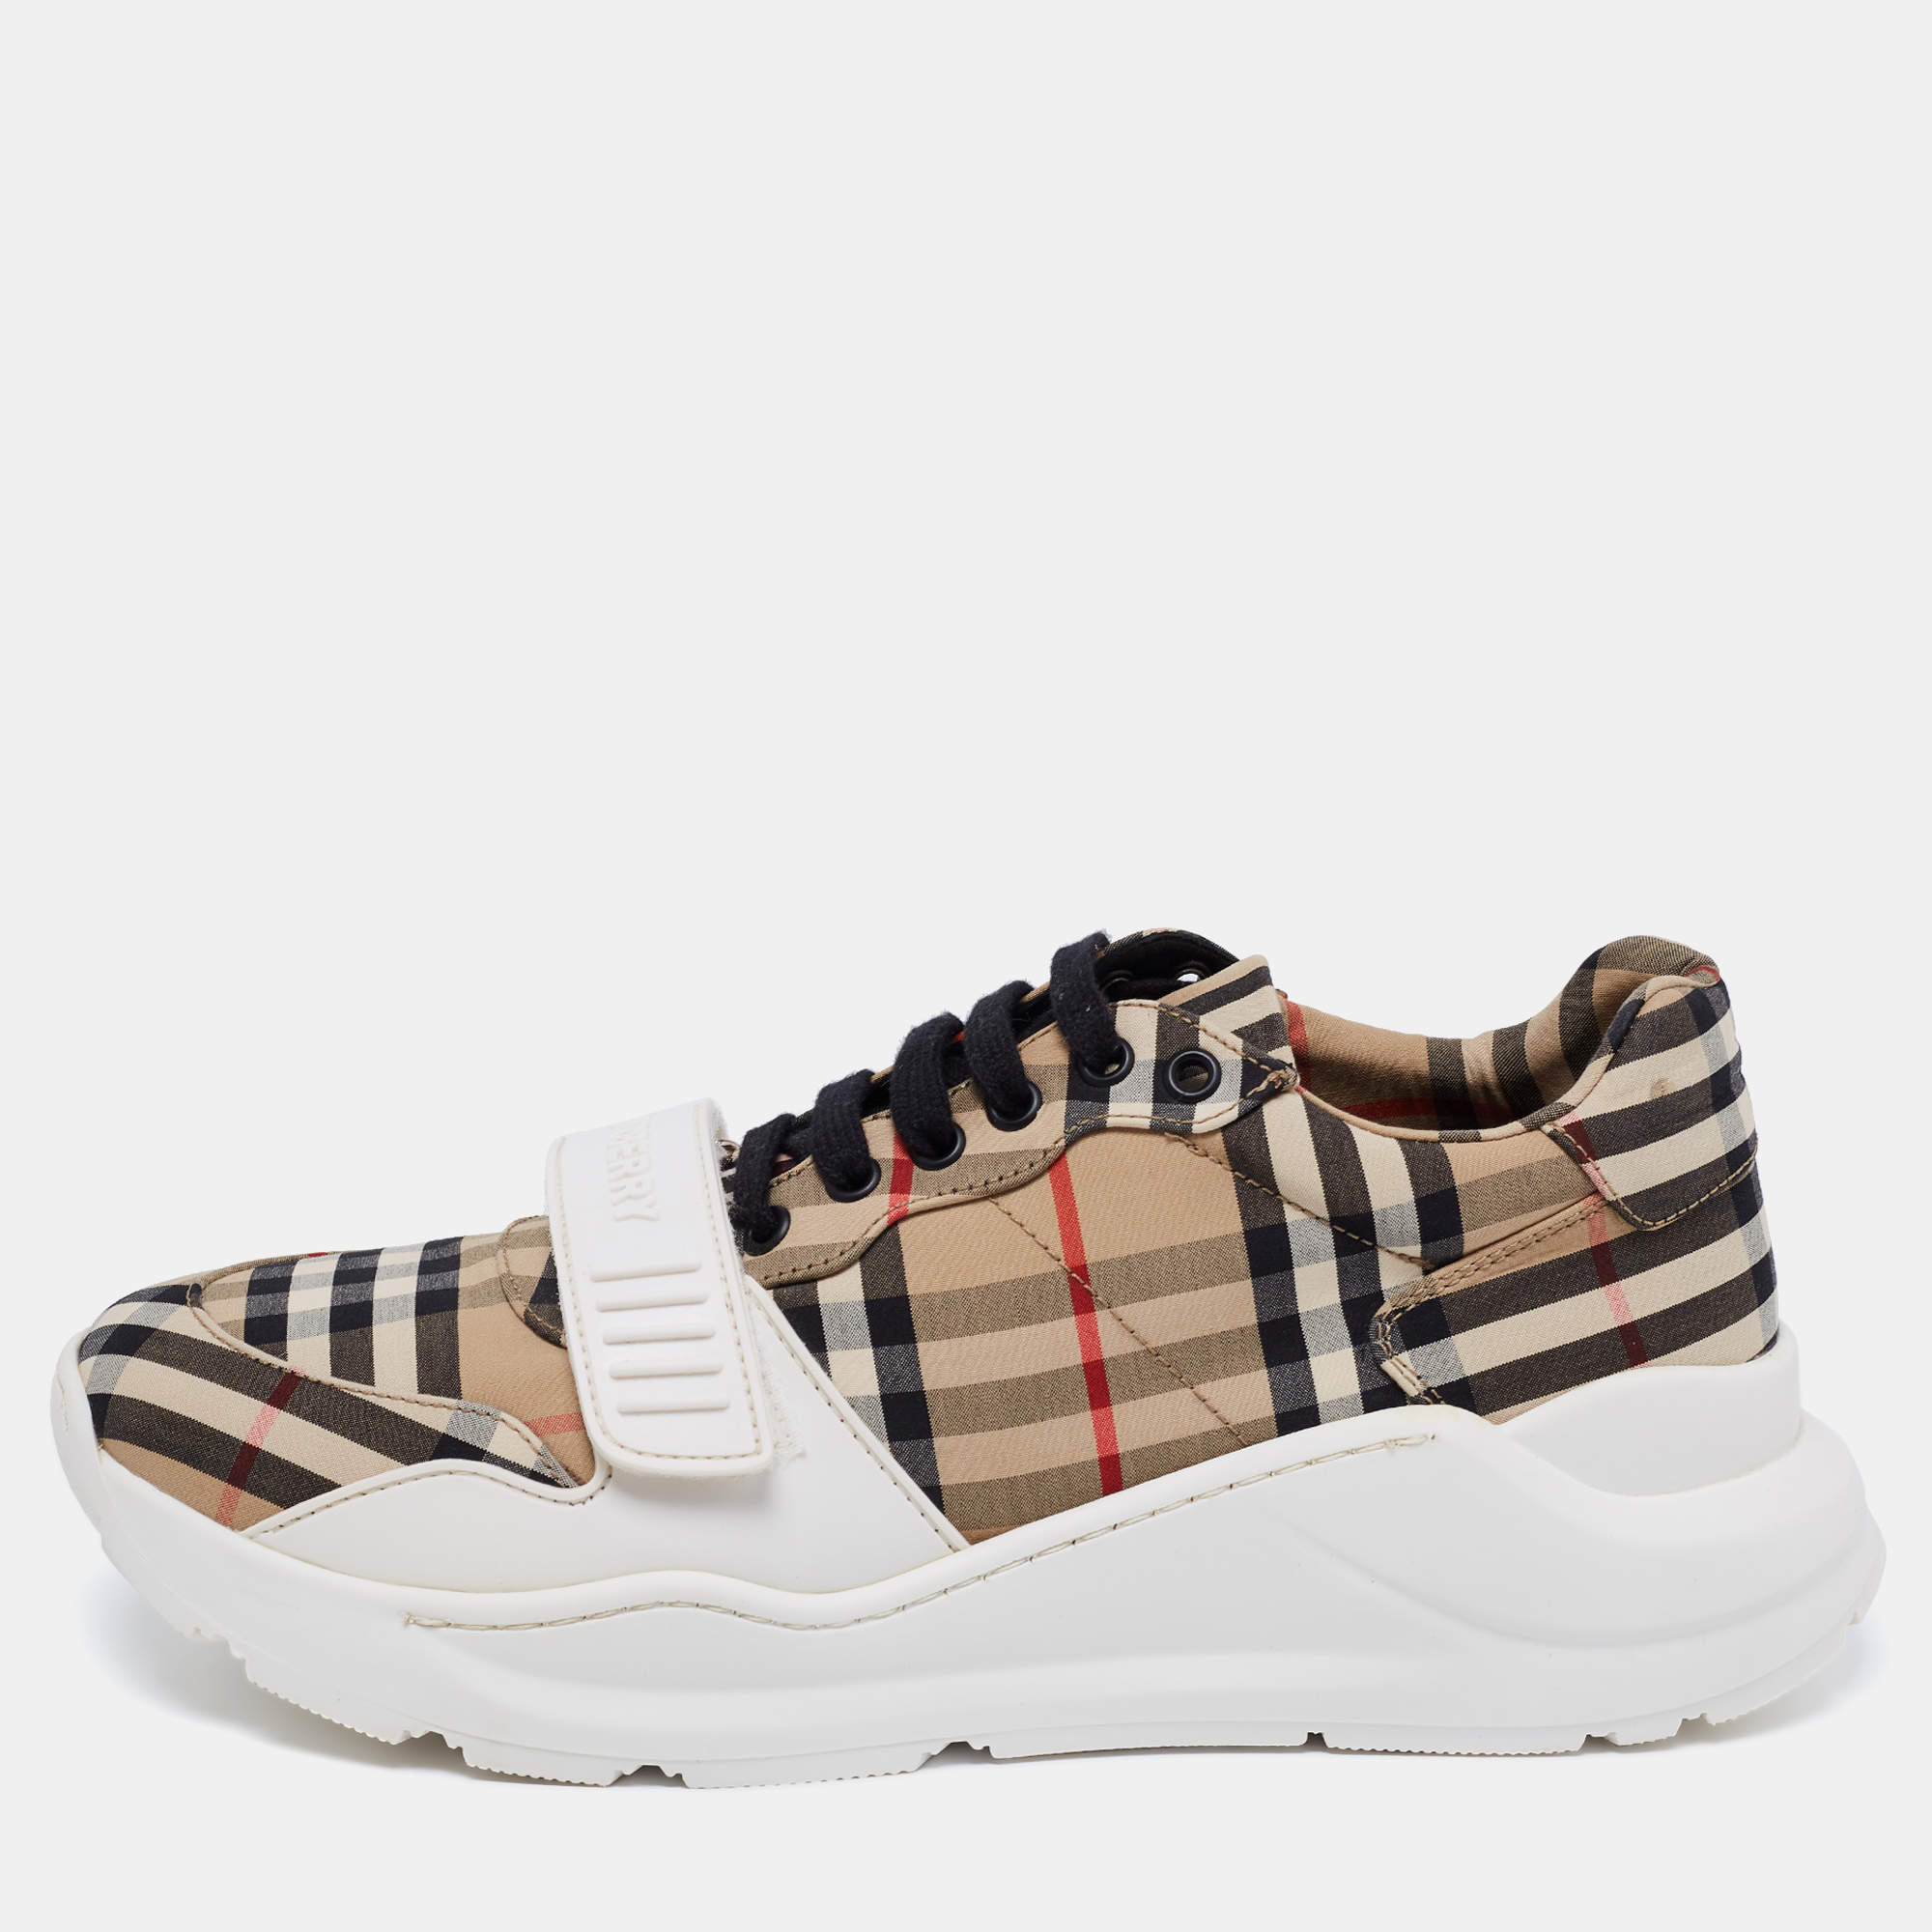 Burberry Multicolor Check Canvas Regis Chunky Sneakers Size 42 Burberry ...